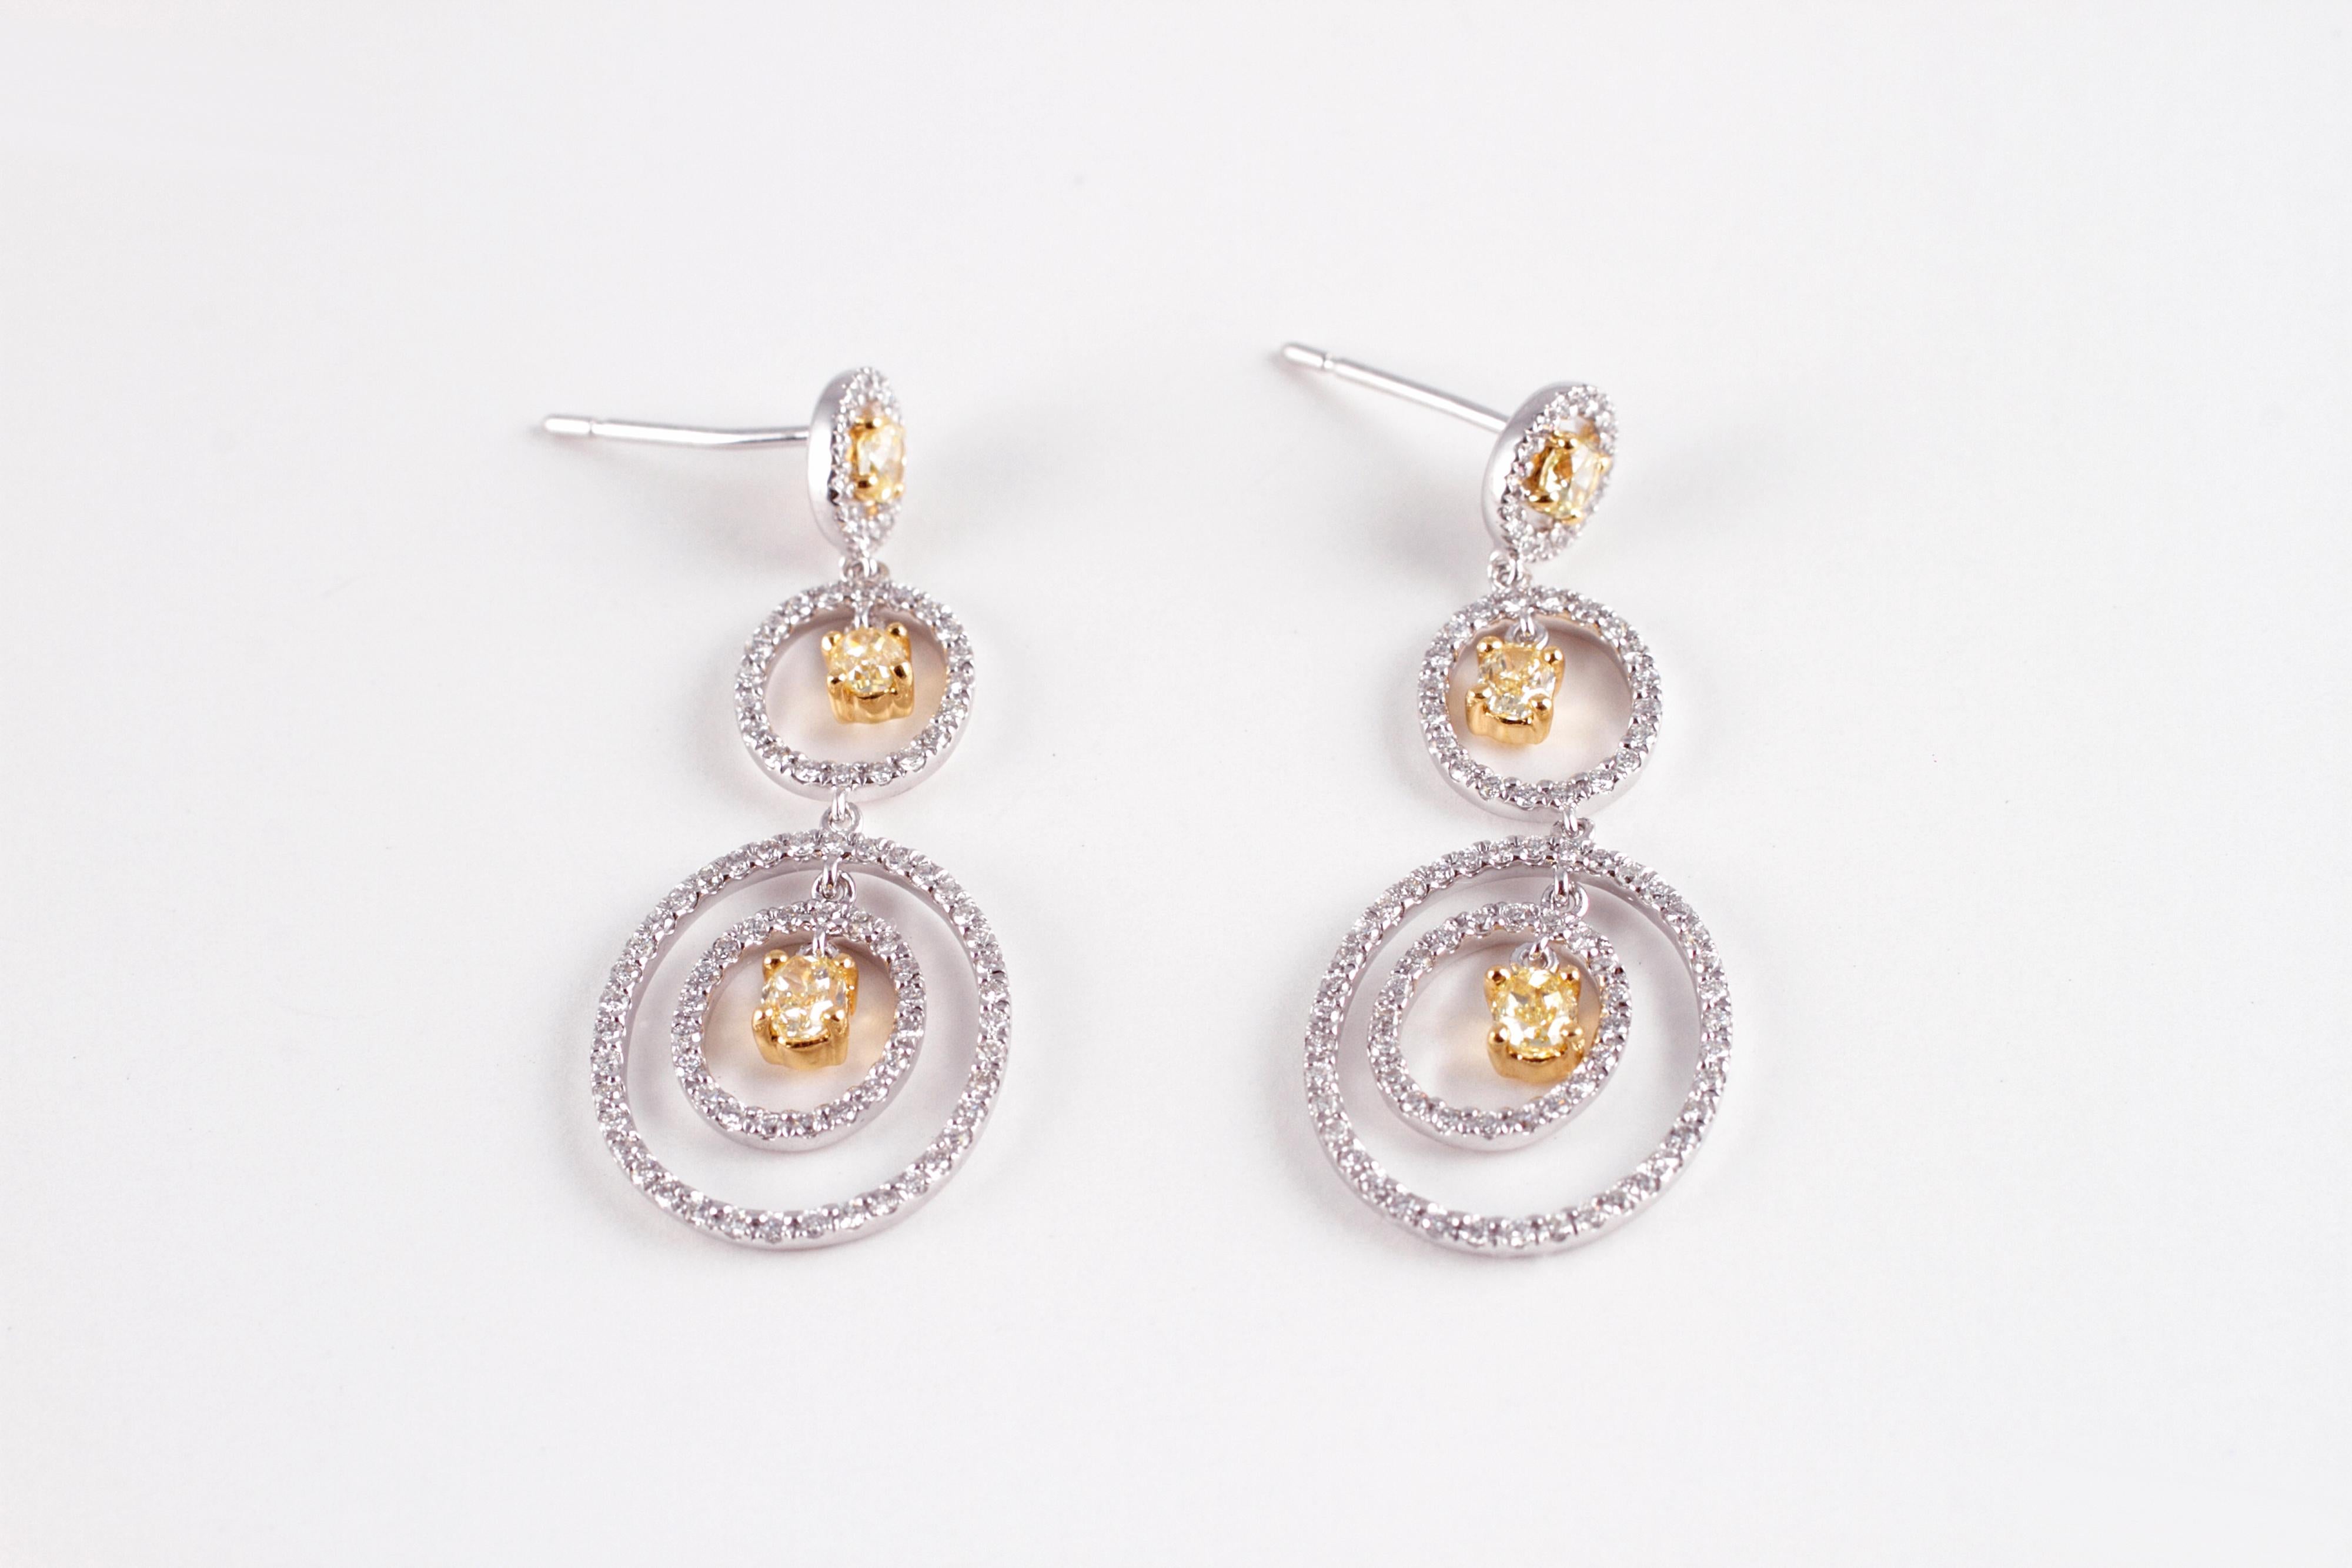 Purchased from famed jewelry designer David Morris of London, these earrings support 0.89 carats of beautifully matched yellow diamonds and 0.77 carats of white diamonds and each one is secured with a standard friction back.  The current Retail